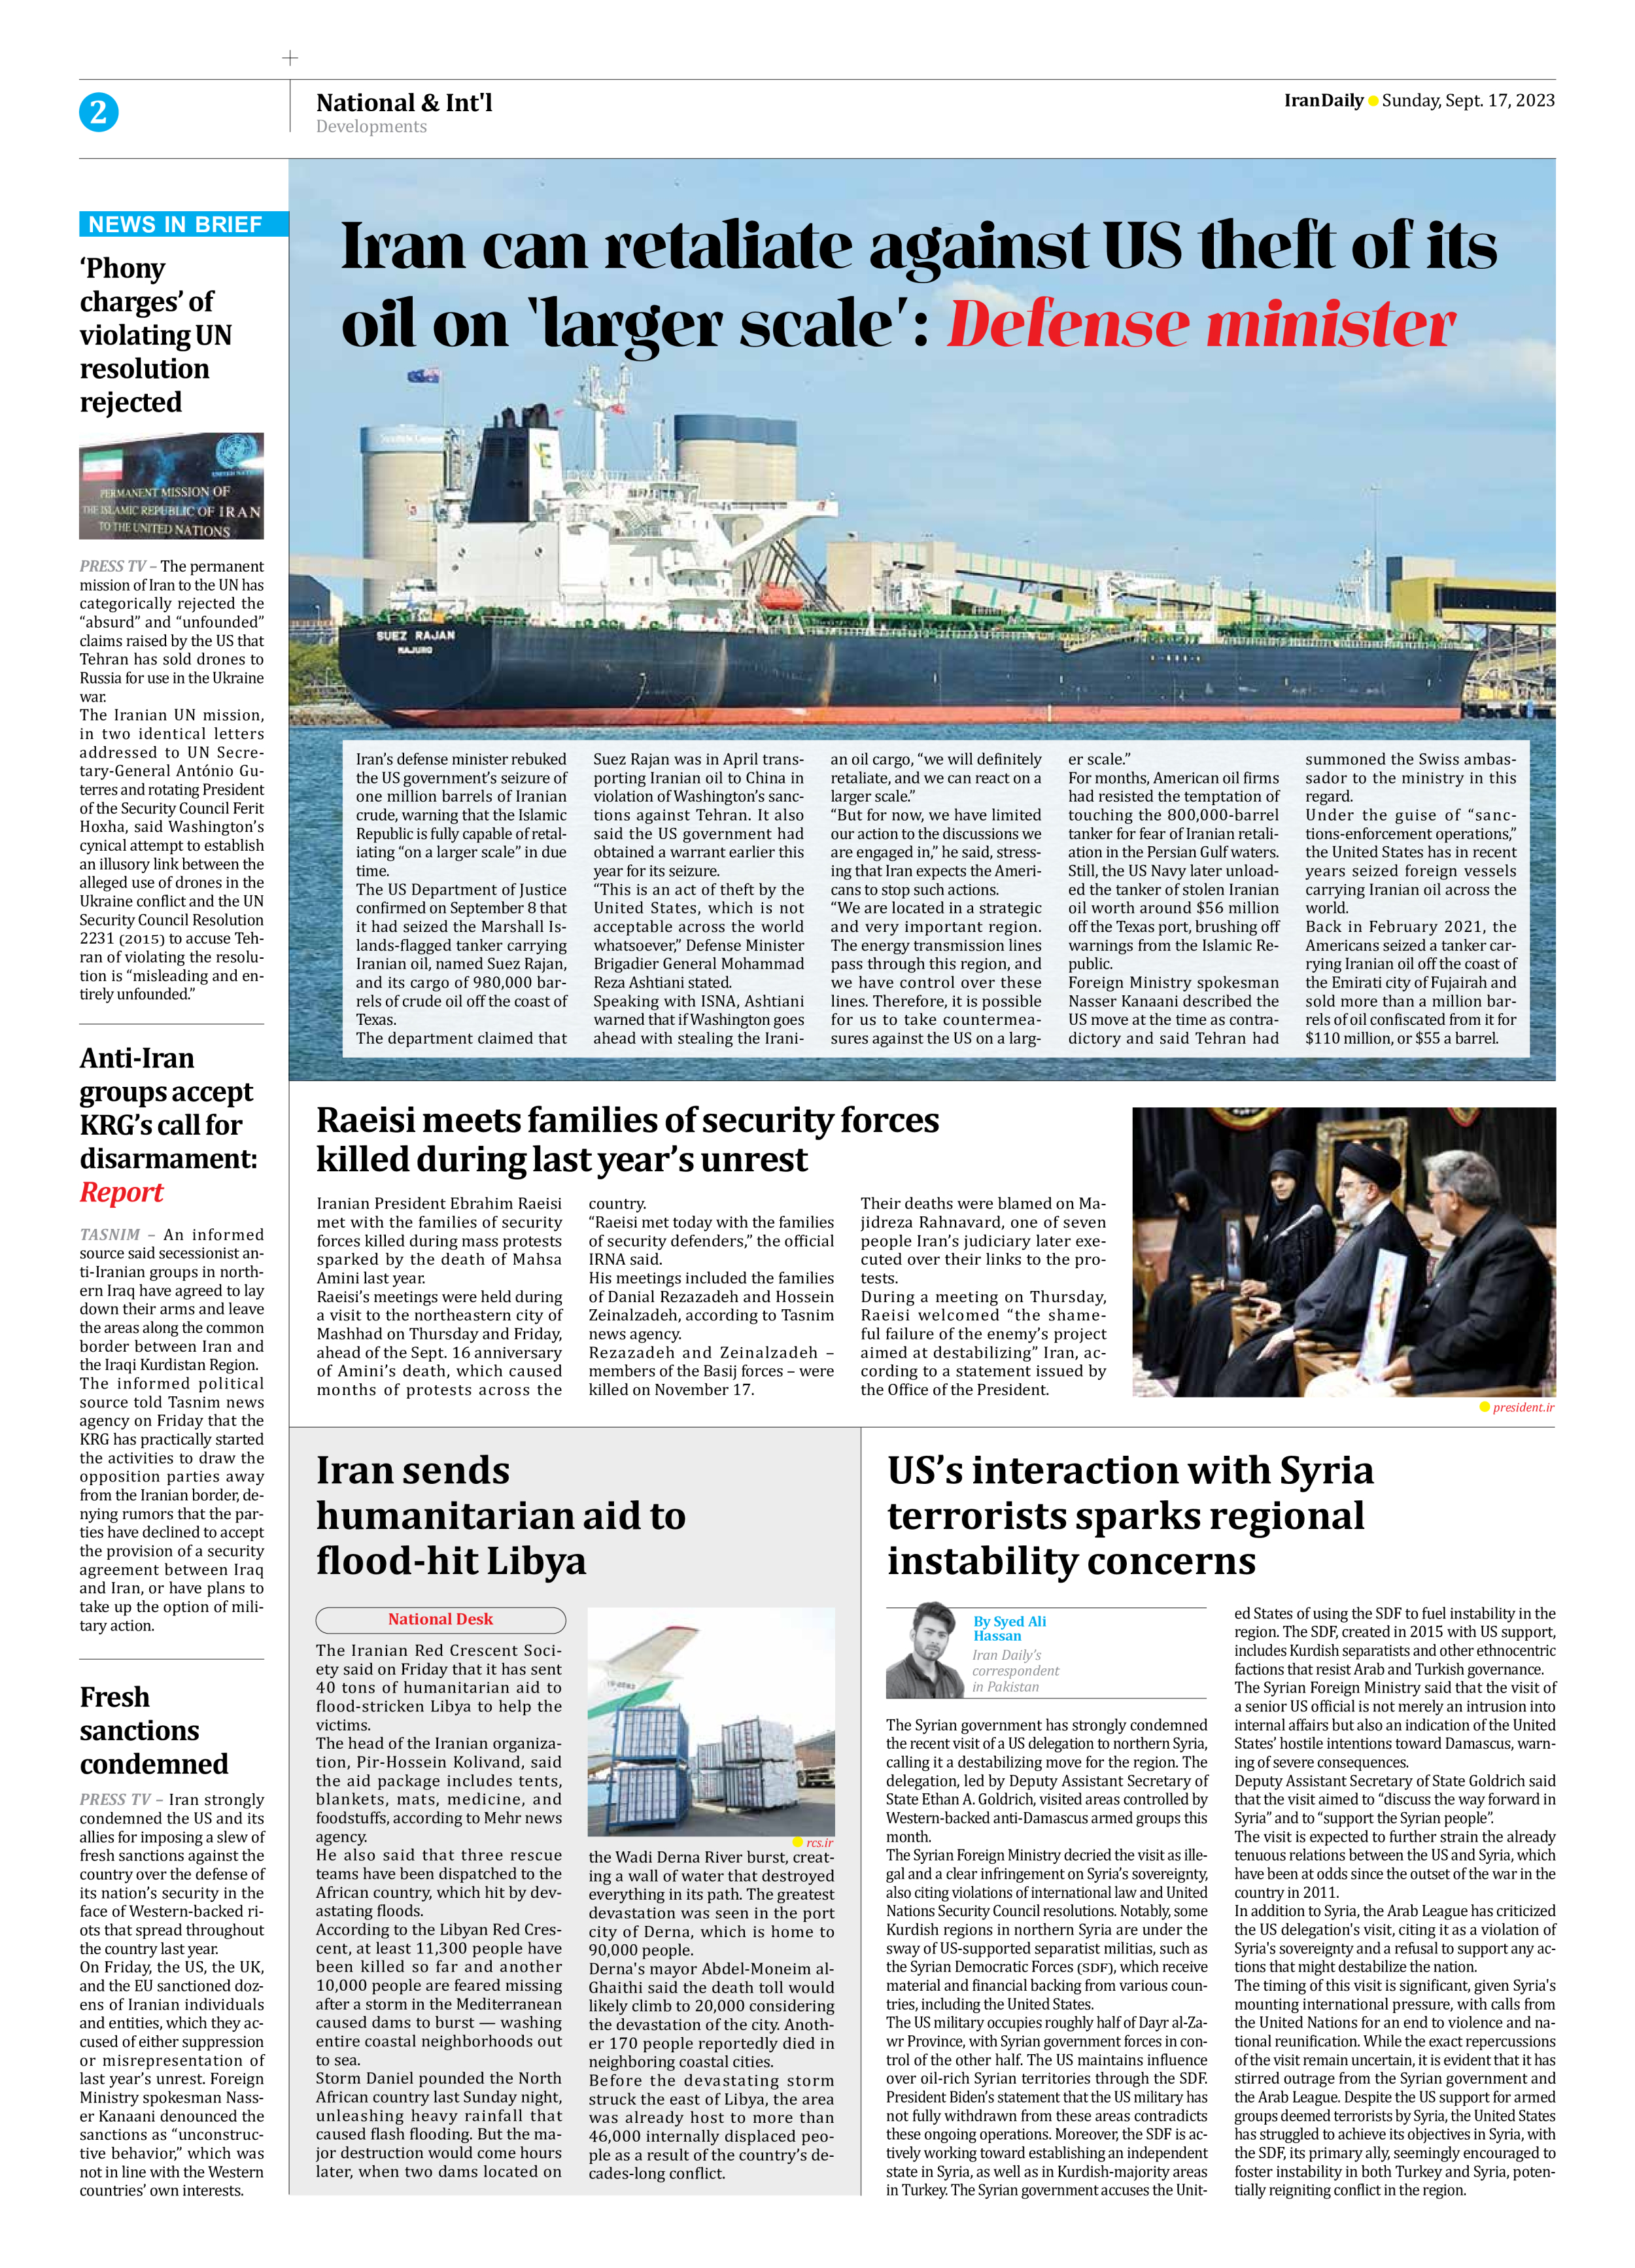 Iran Daily - Number Seven Thousand Three Hundred and Eighty Seven - 17 September 2023 - Page 2